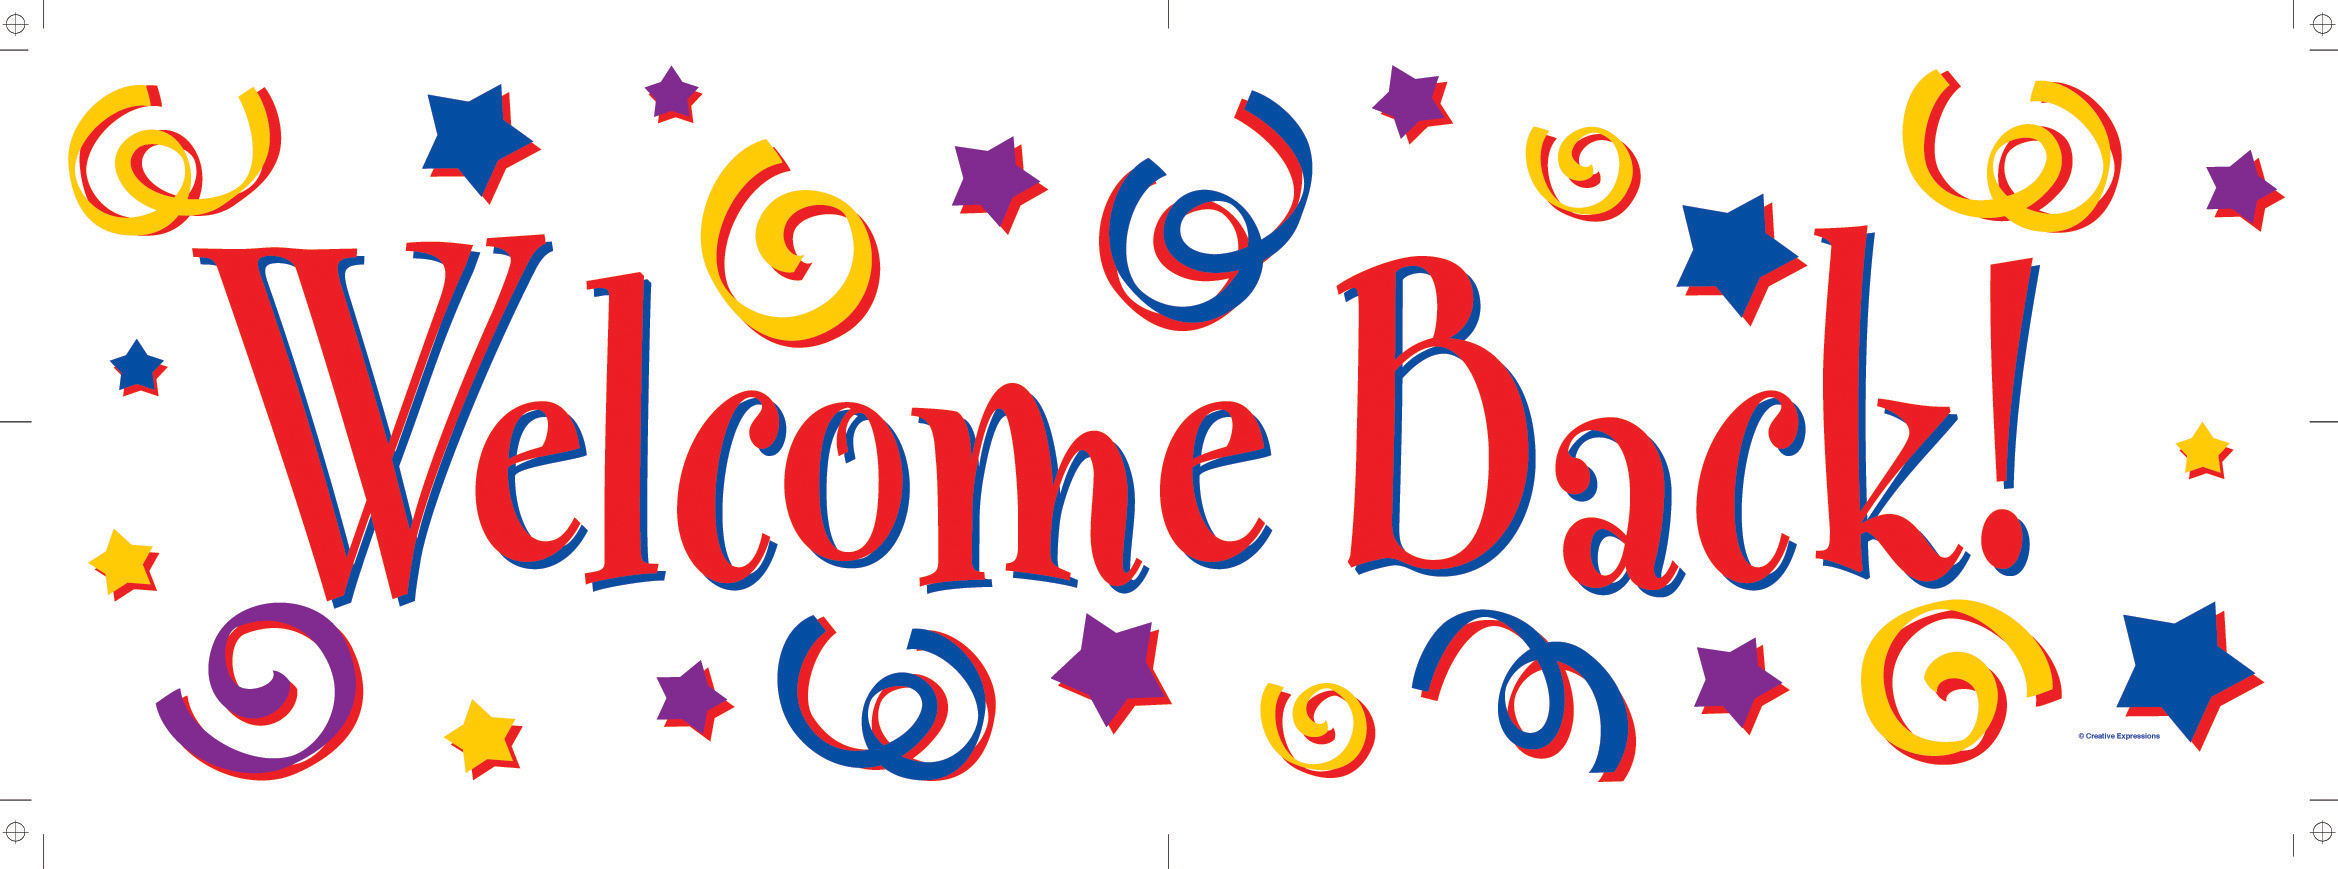 images-for-welcome-back-to-school-banner-cliparts-co